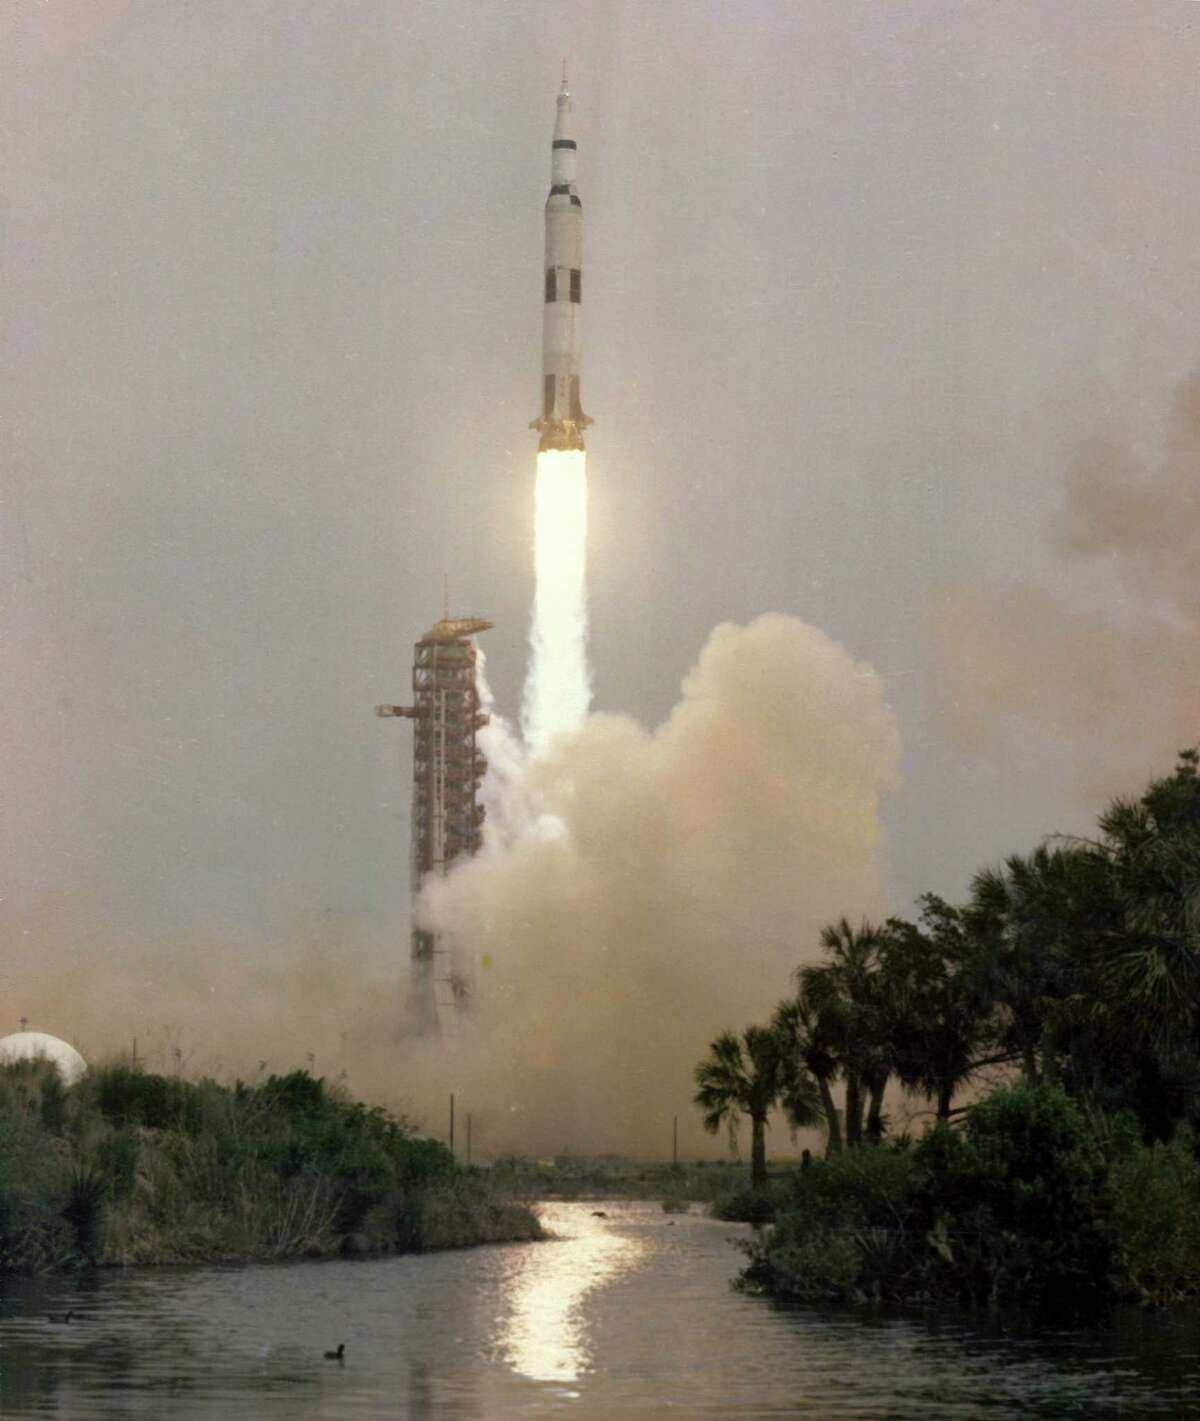 Apollo 13 Launching From Kennedy Space Center, Cape Canaveral, Fla., April 11, 1970. It was to be the third mission in which humans would land on the moon.